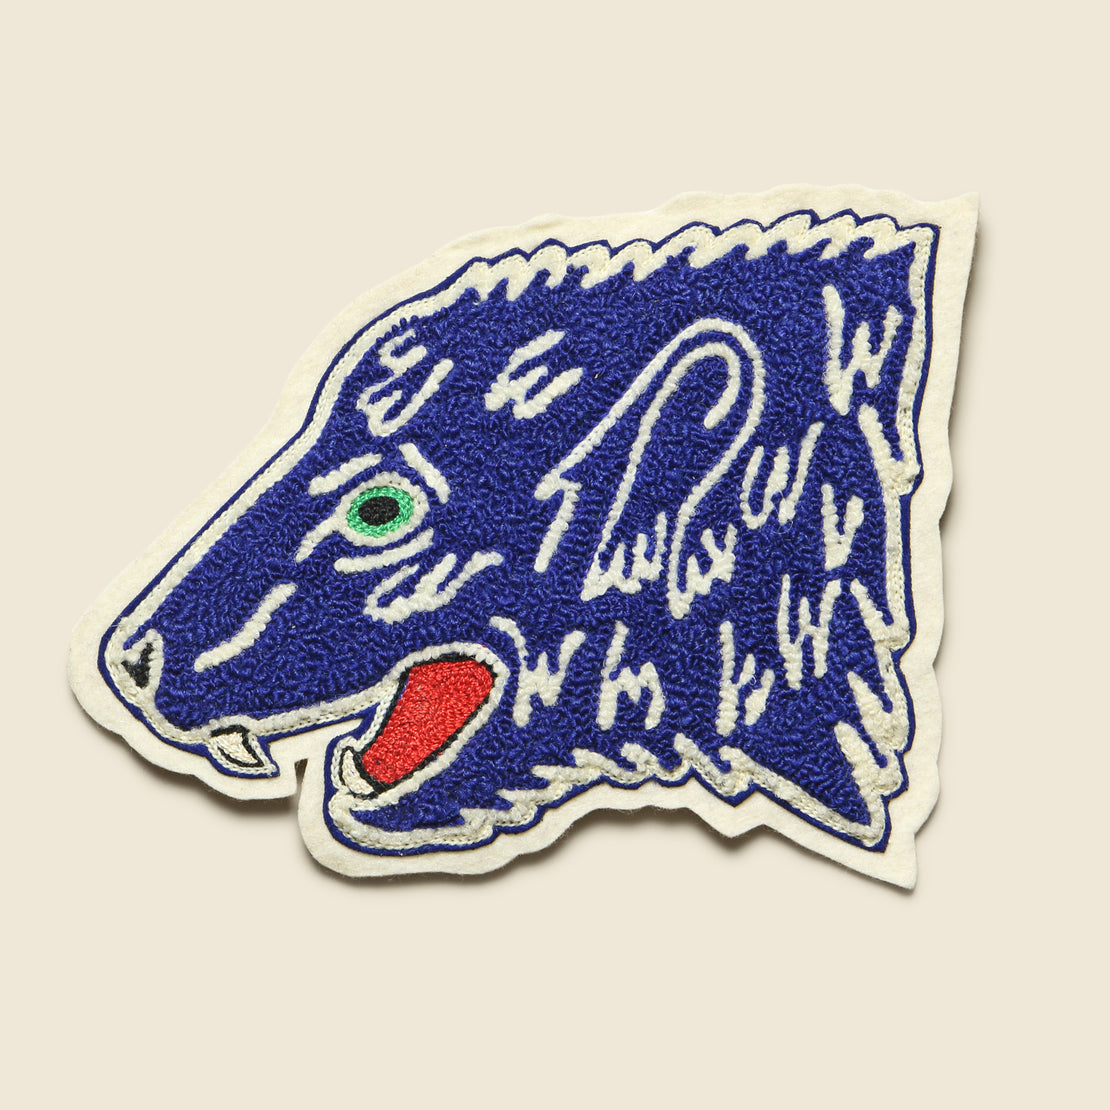 Vintage Patch - Wolf